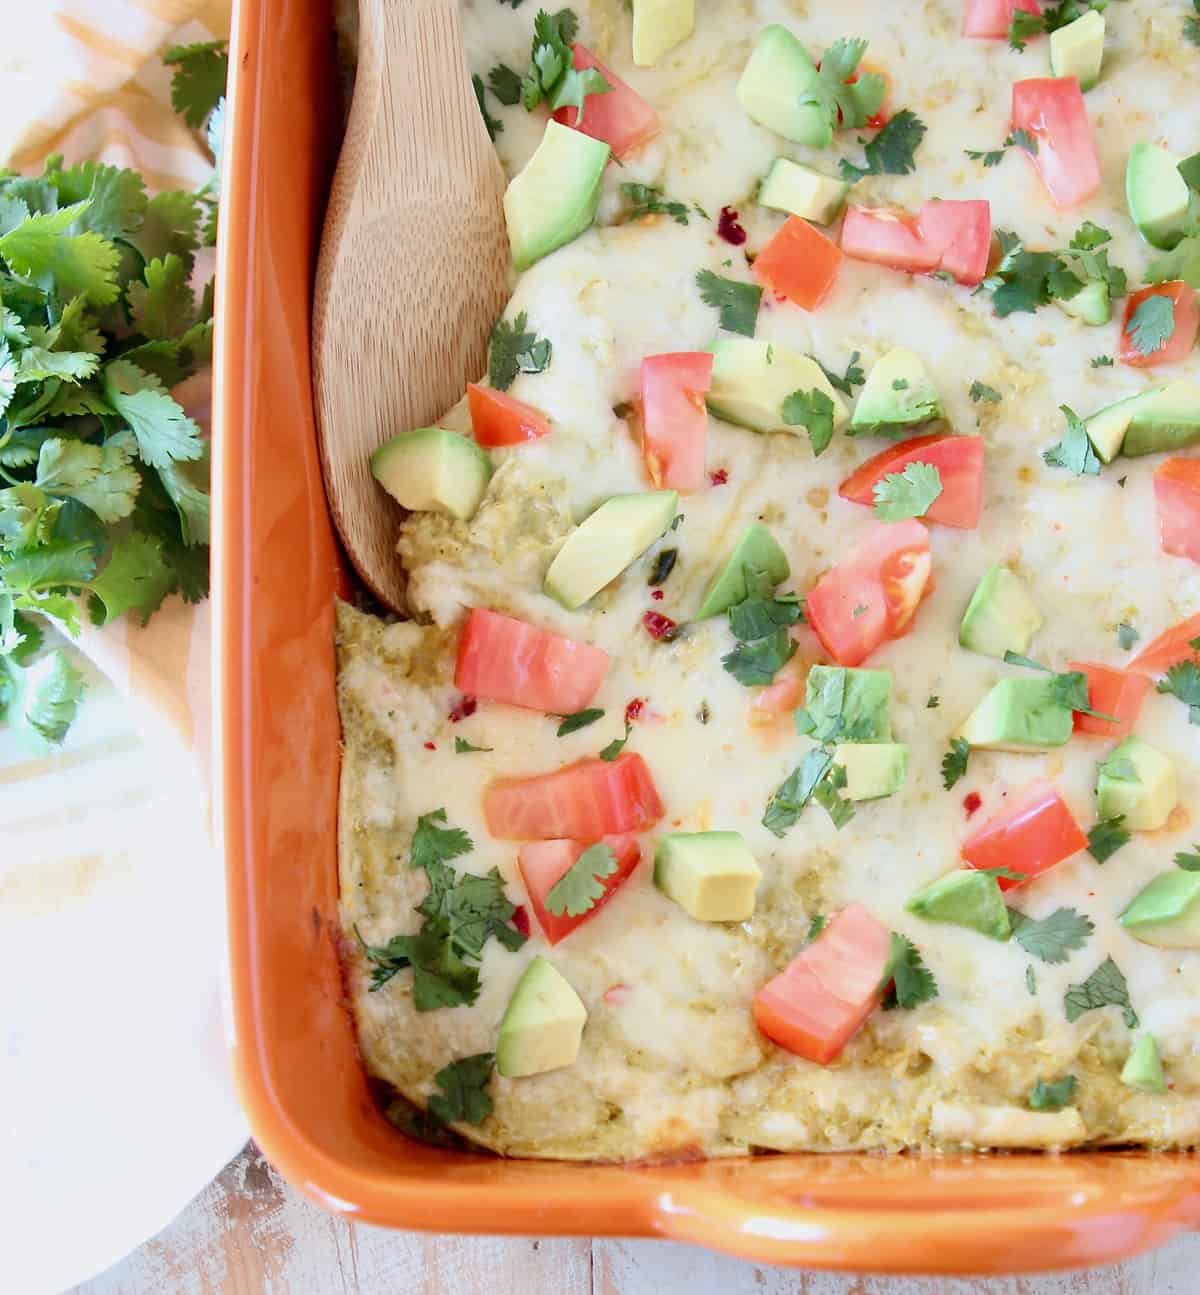 Chicken enchilada casserole topped with diced tomatoes and avocado